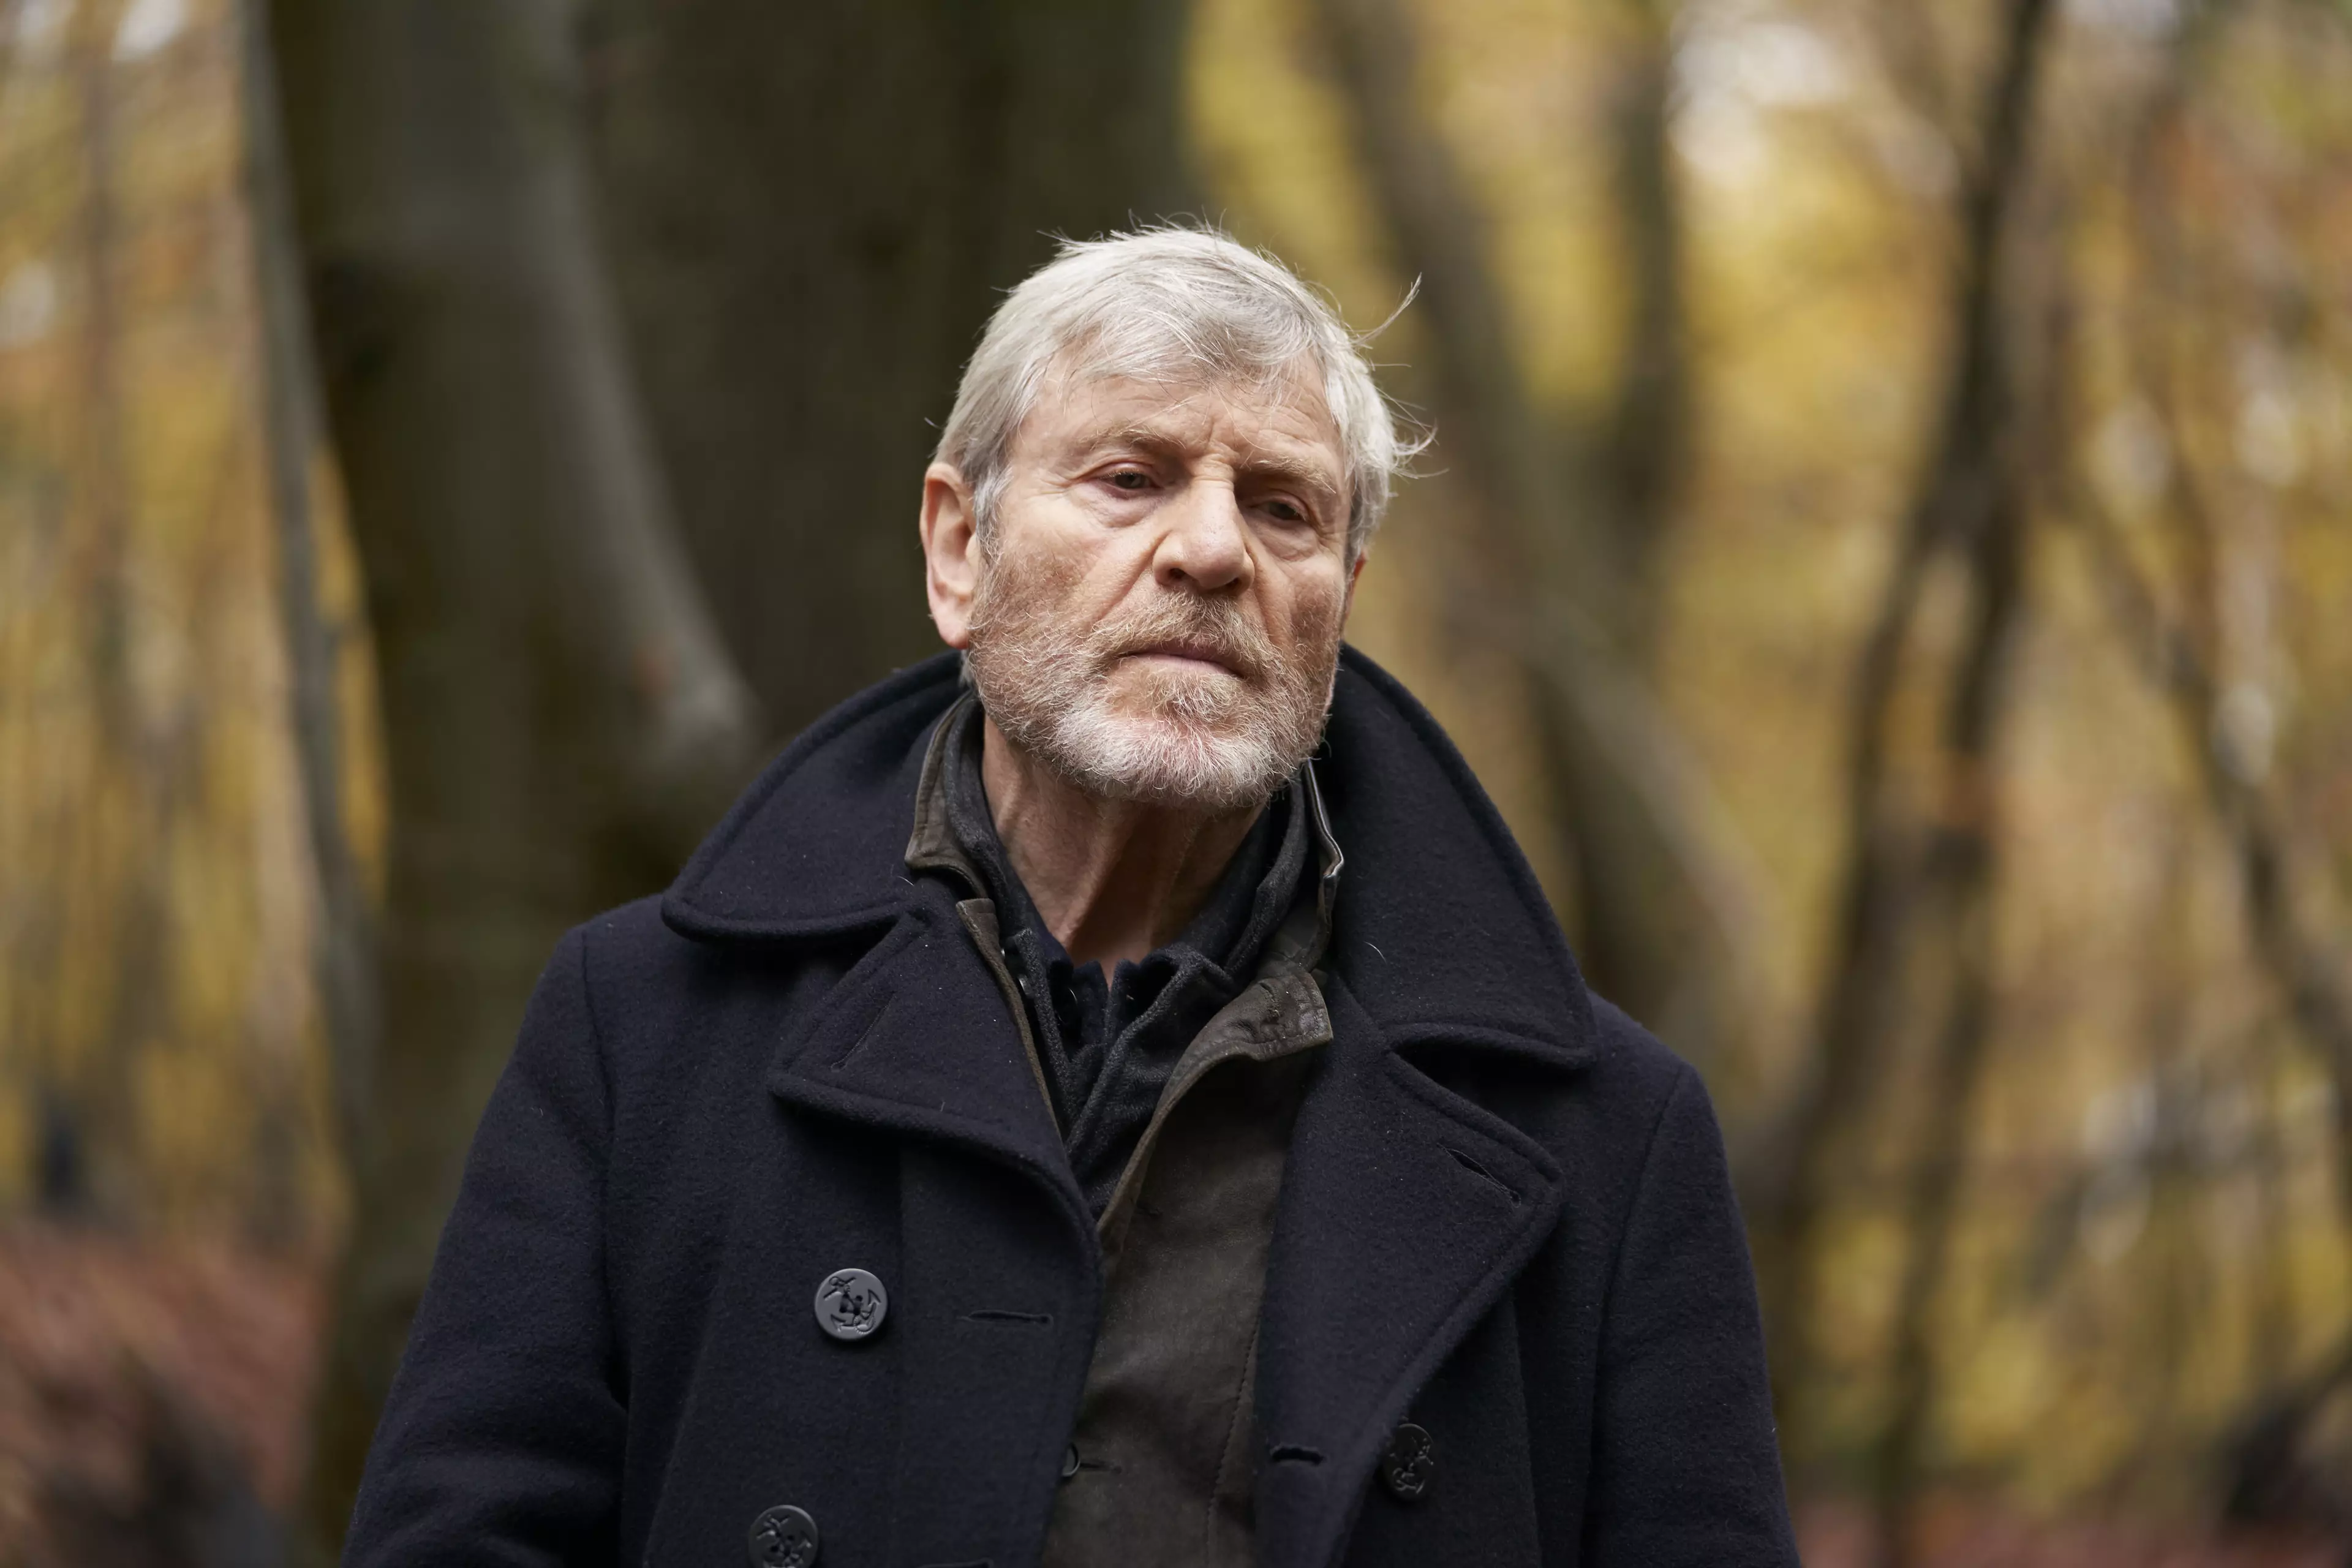 For the second season, Tchéky Karyo resumes his role as Julien Baptiste (